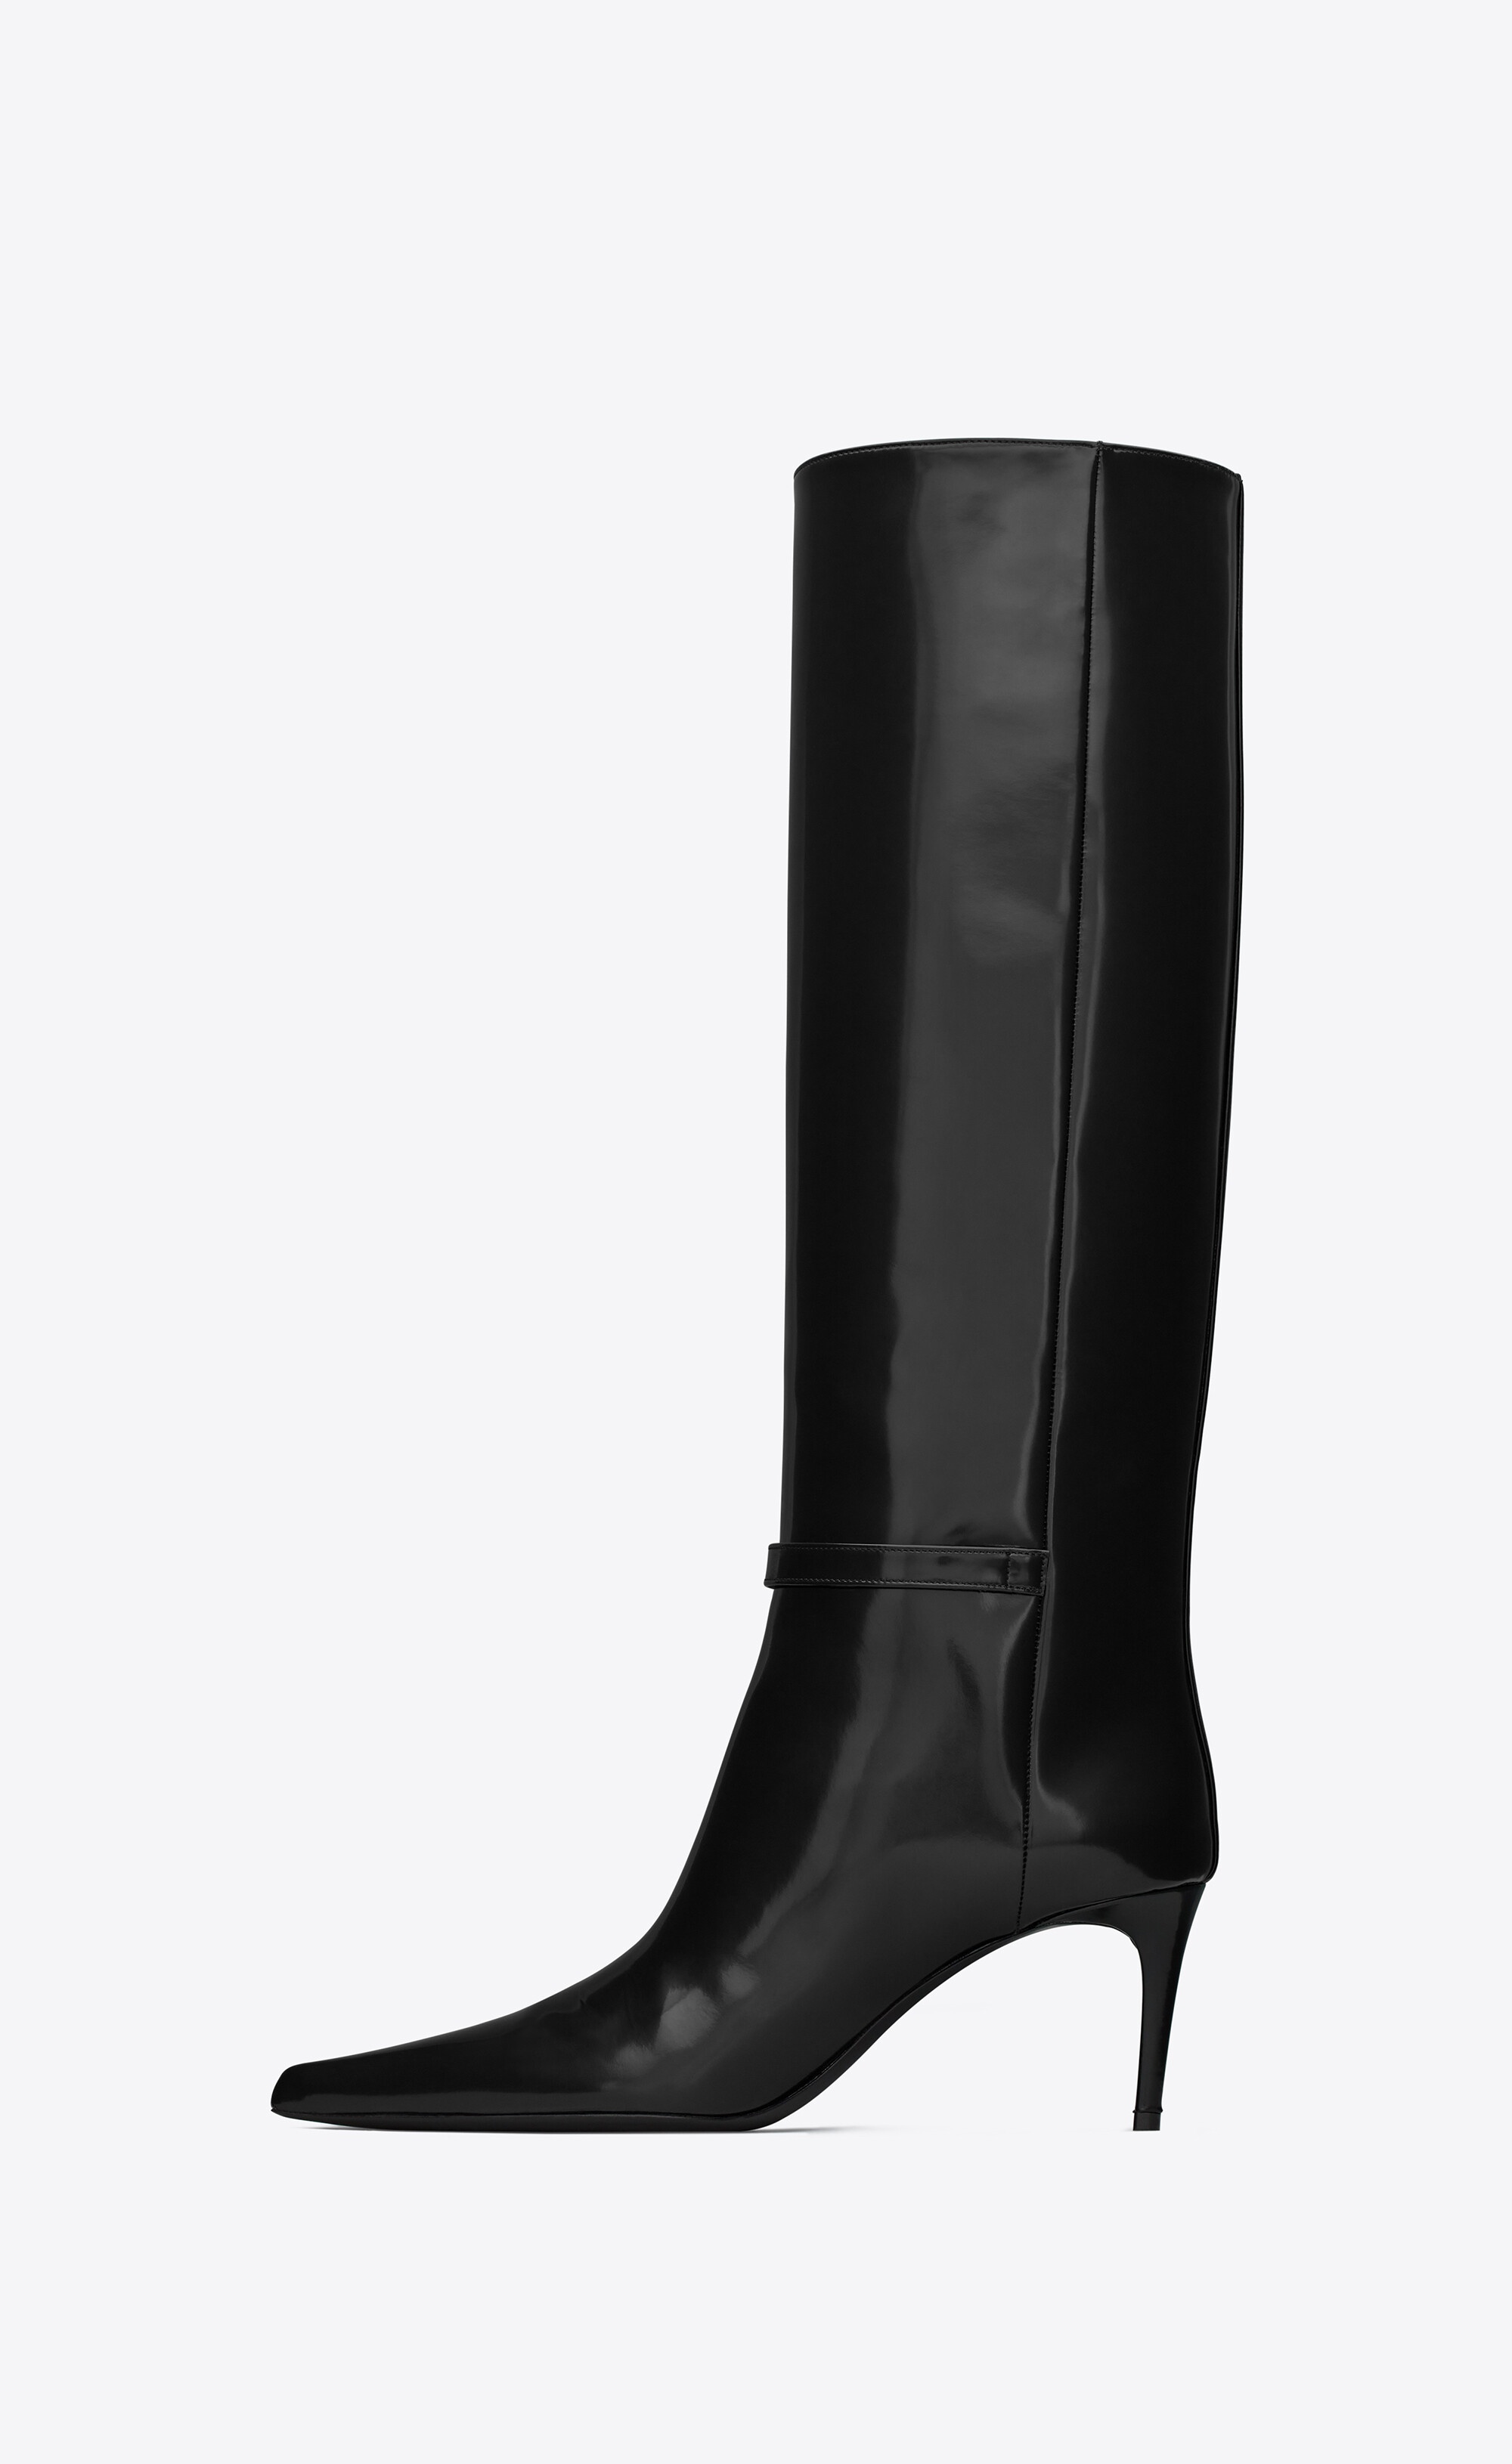 lee boots in glazed leather - 4